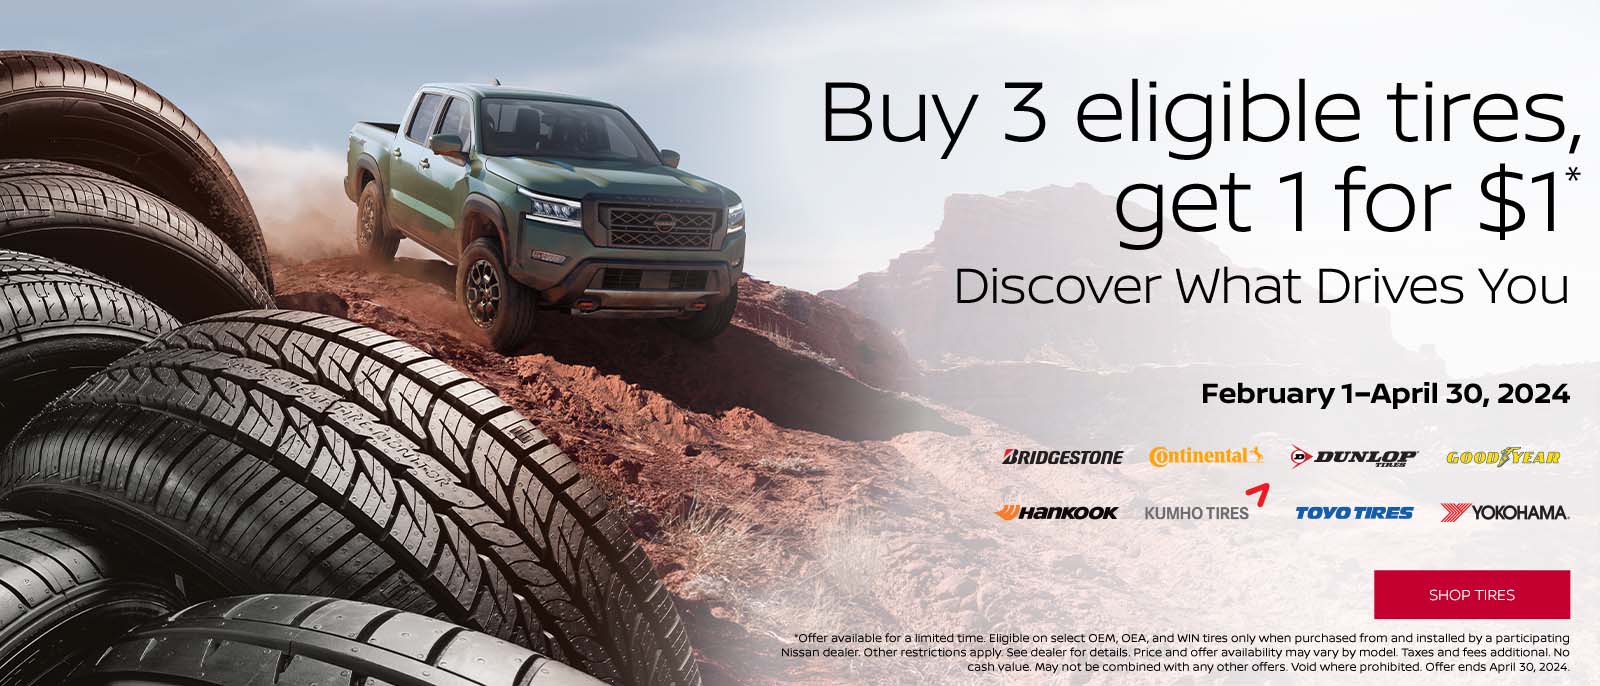 Buy 3 Eligible Tires, get 1 for $1 